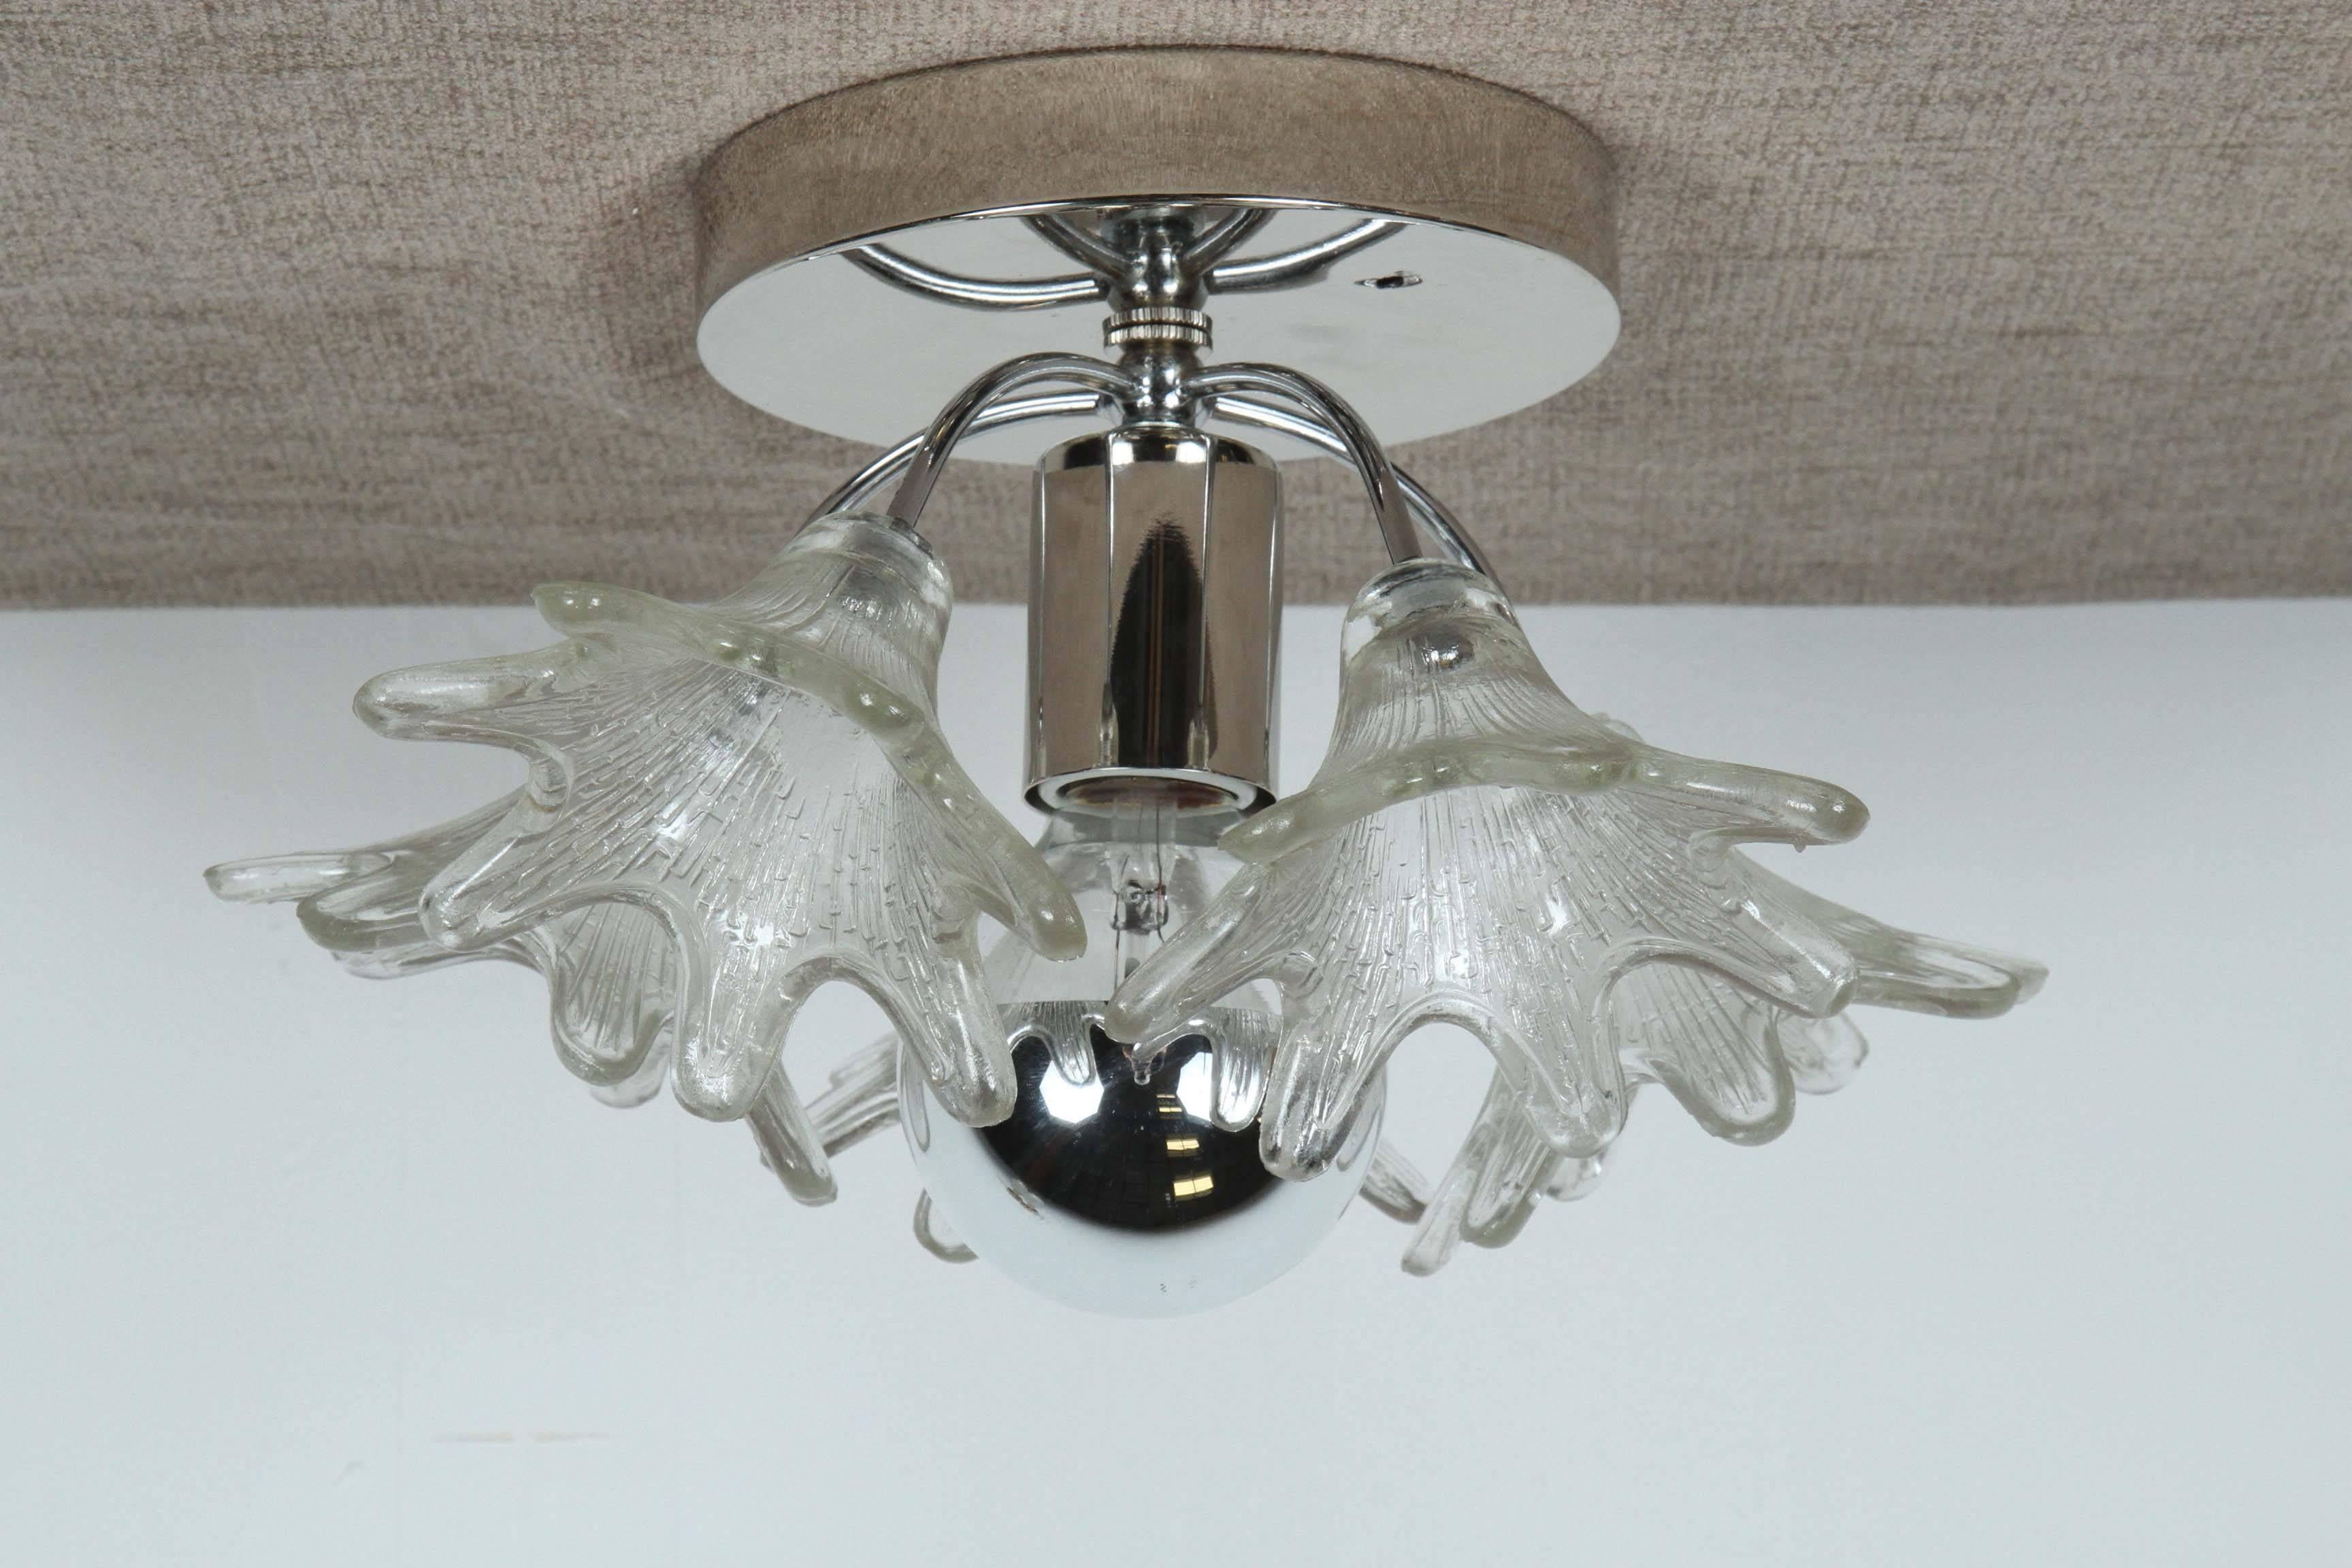 Pair of Murano flower sconces in the style of Venini.
Each sconce has five handblown glass flower elements which are mounted on to polished nickel backplates that have been newly rewired for the US with a single centre light source.
They can be